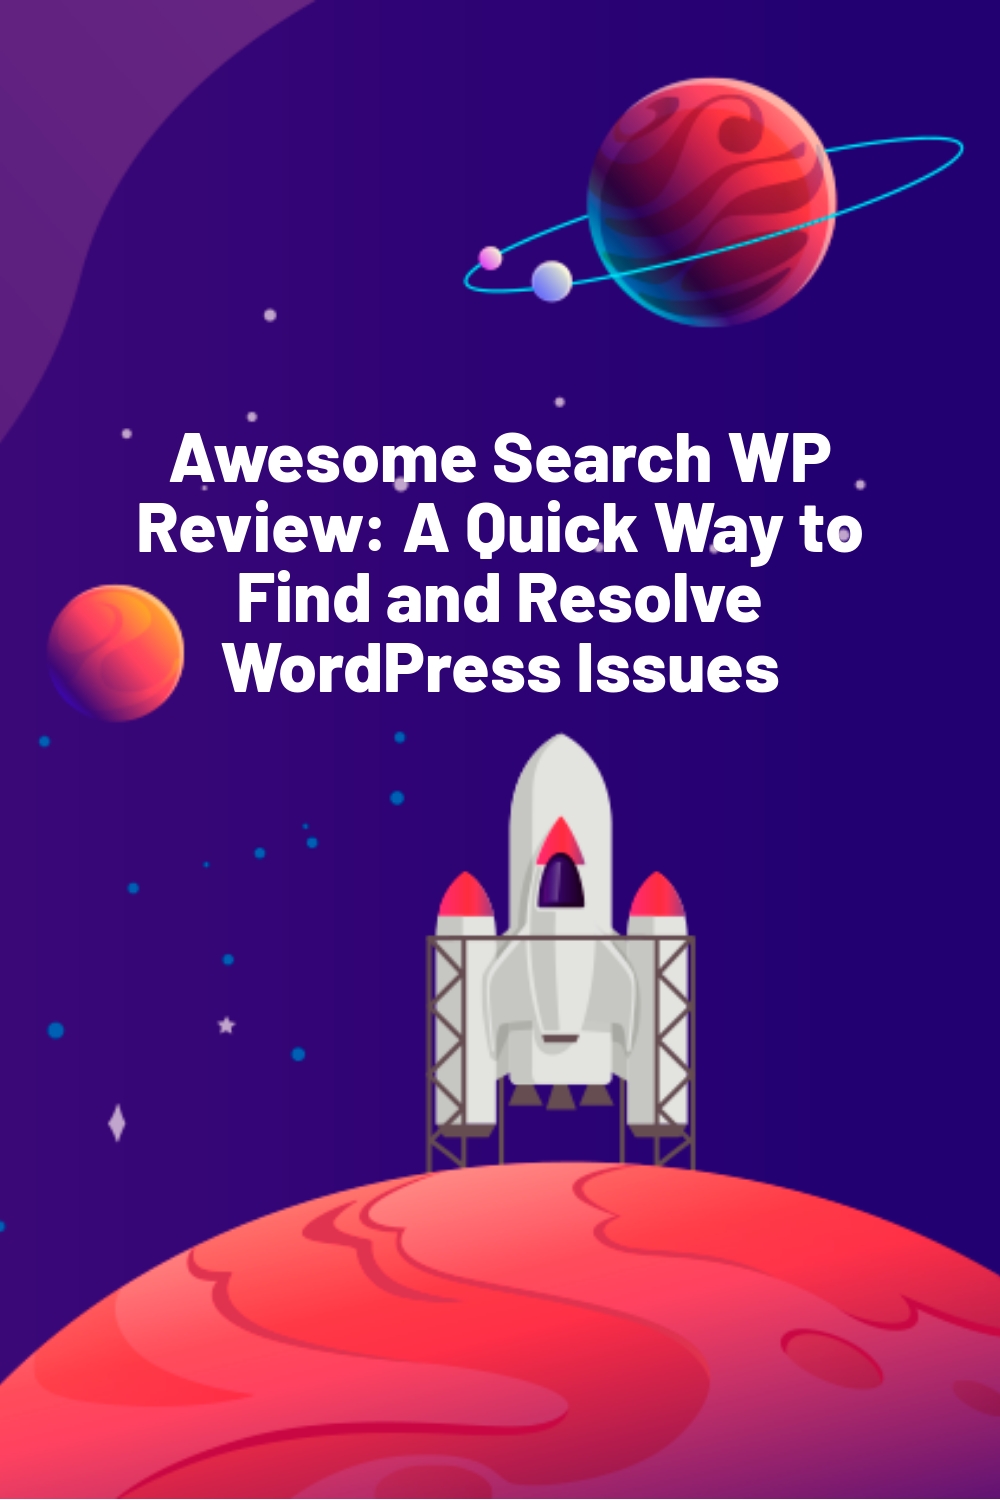 Awesome Search WP Review: A Quick Way to Find and Resolve WordPress Issues